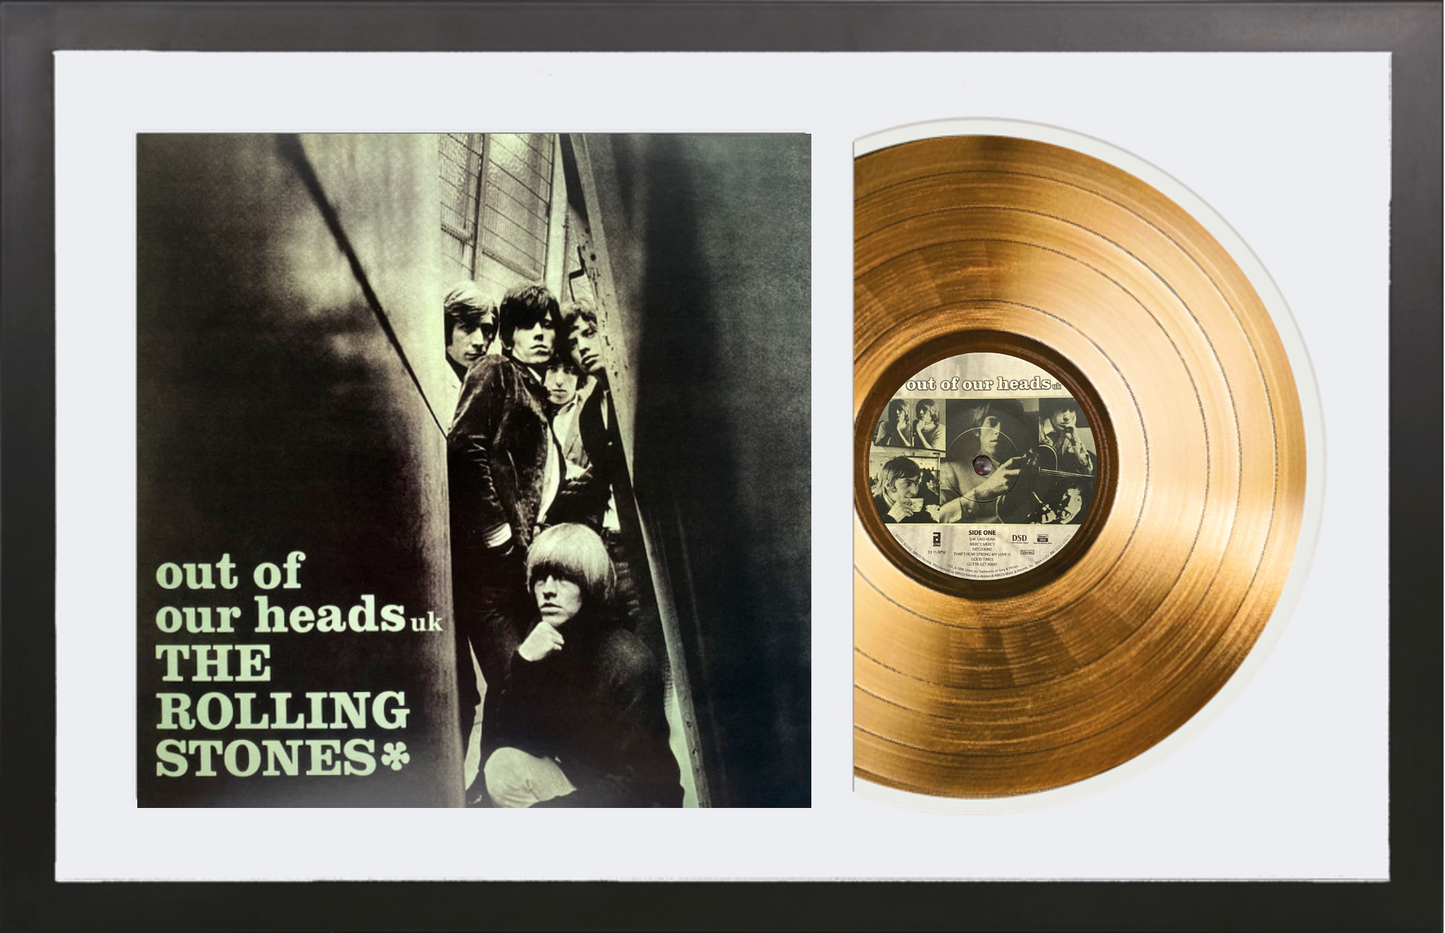 The Rolling Stones - Out of Our Heads - 14K Gold Framed Album